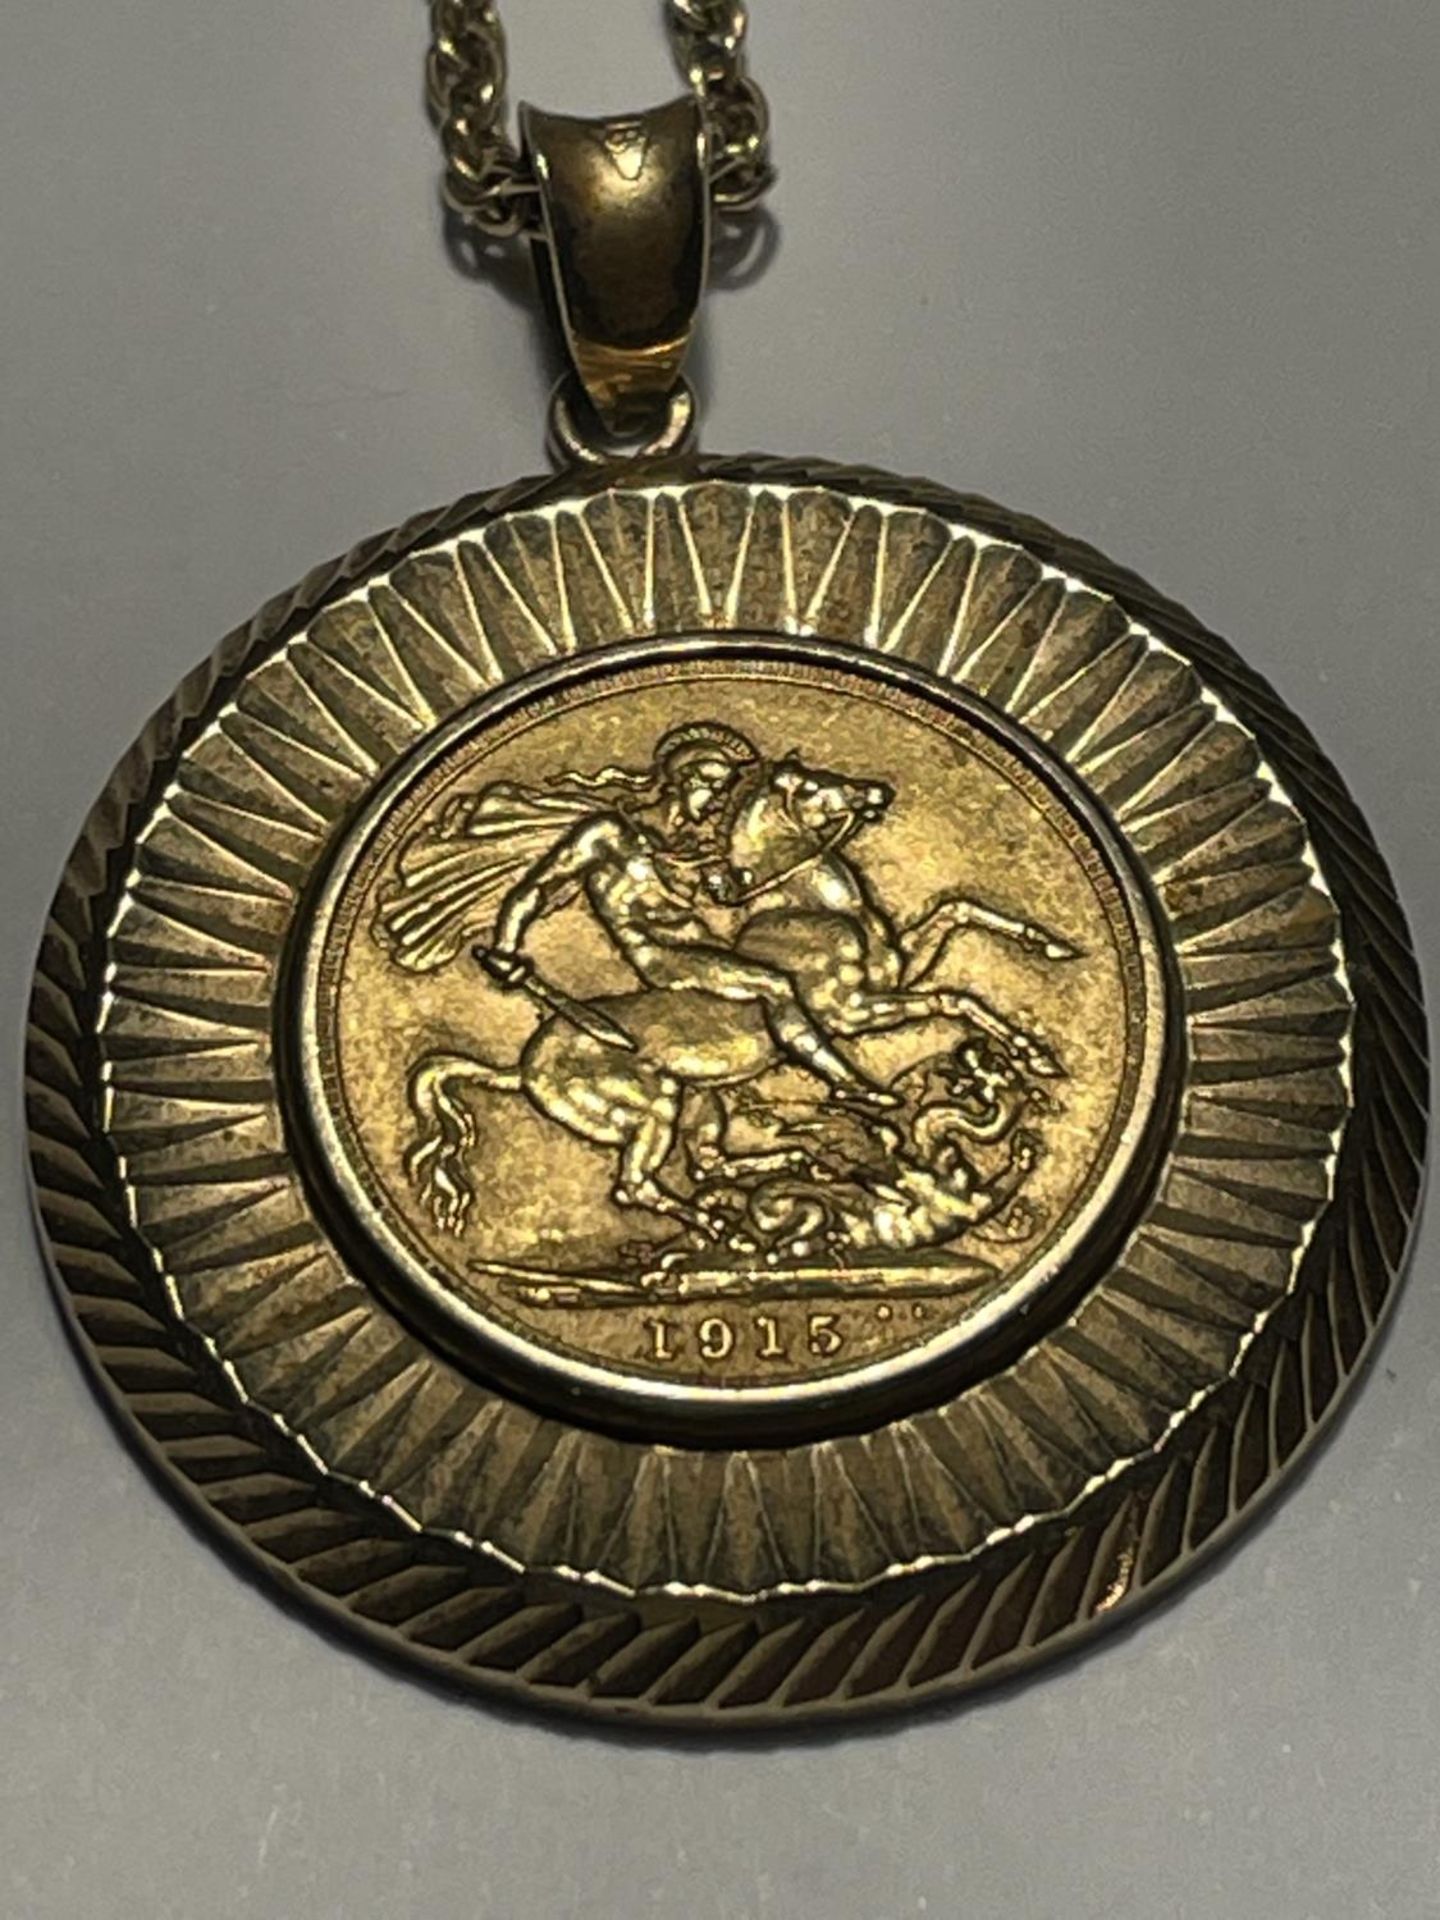 A 1915 GOLD SOVEREIGN IN A 9 CARAT GOLD MOUNT WITH A 9 CARAT GOLD CHAIN GROSS WEIGHT 19.78 GRAMS - Image 2 of 6